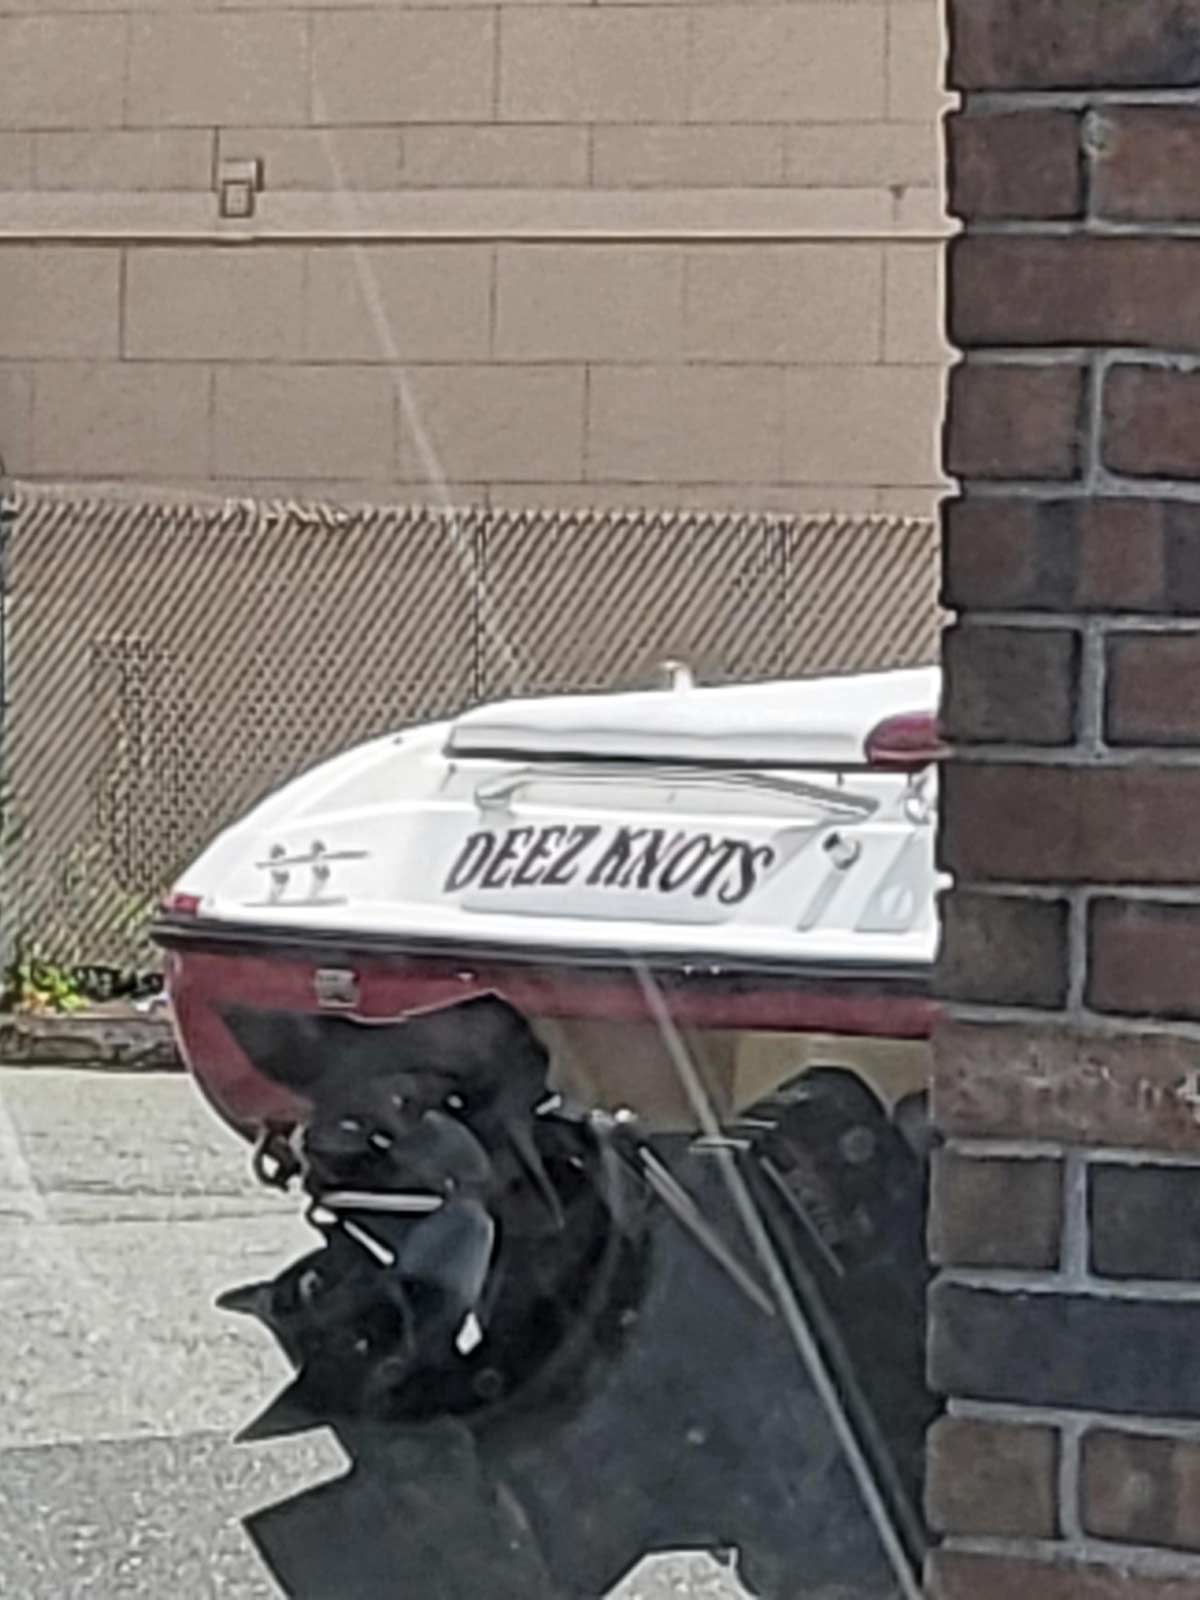 Name of a speedboat in Springfield, MA